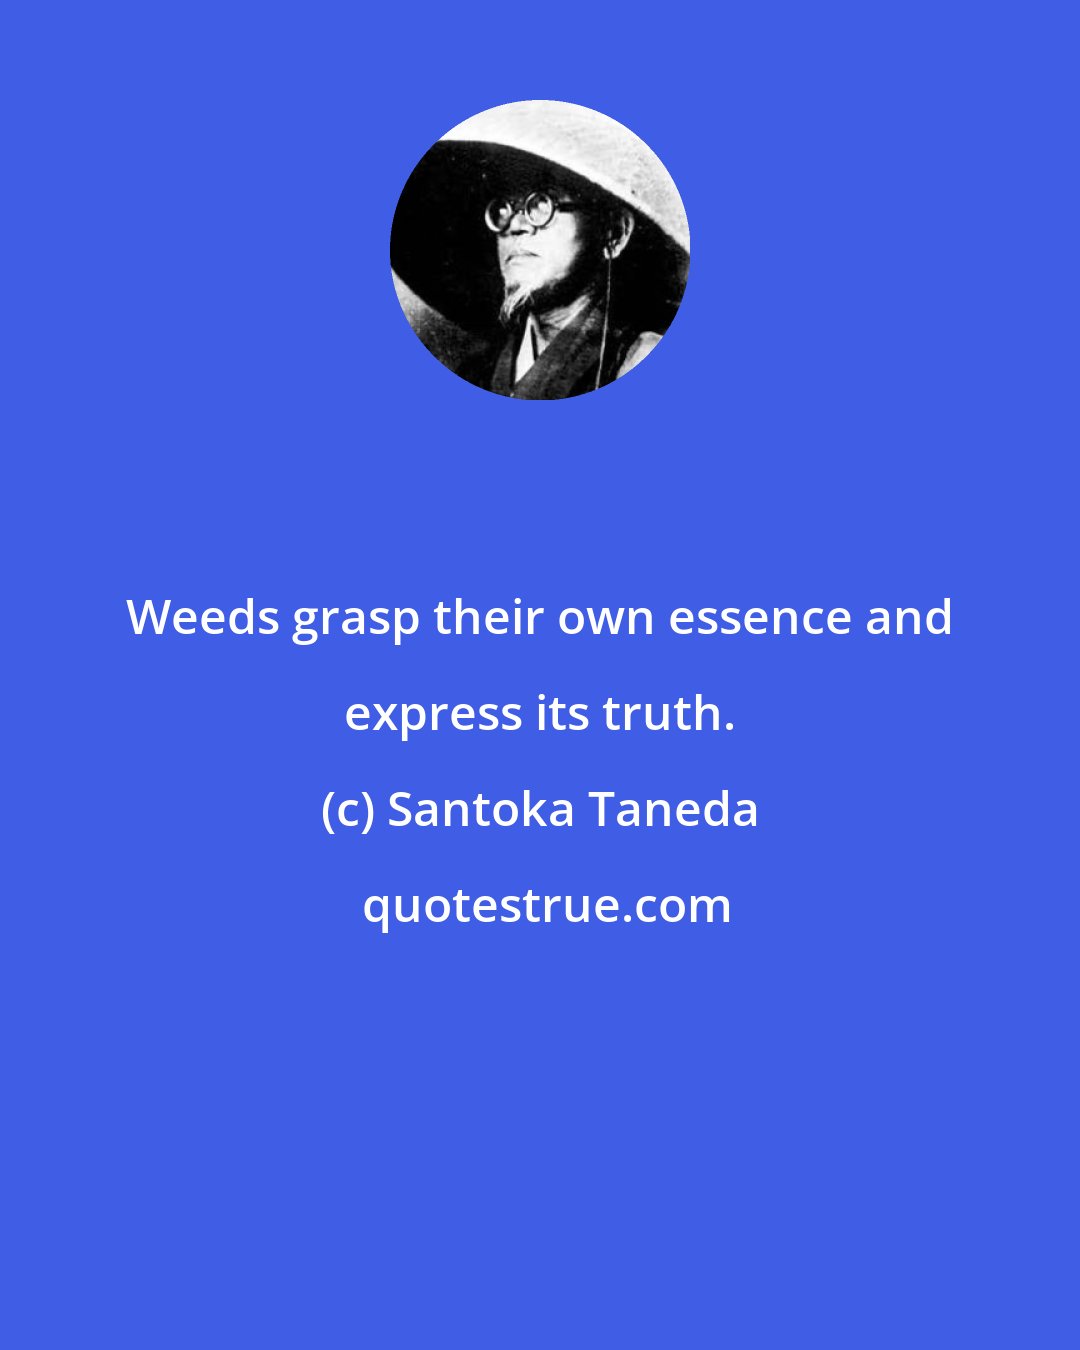 Santoka Taneda: Weeds grasp their own essence and express its truth.